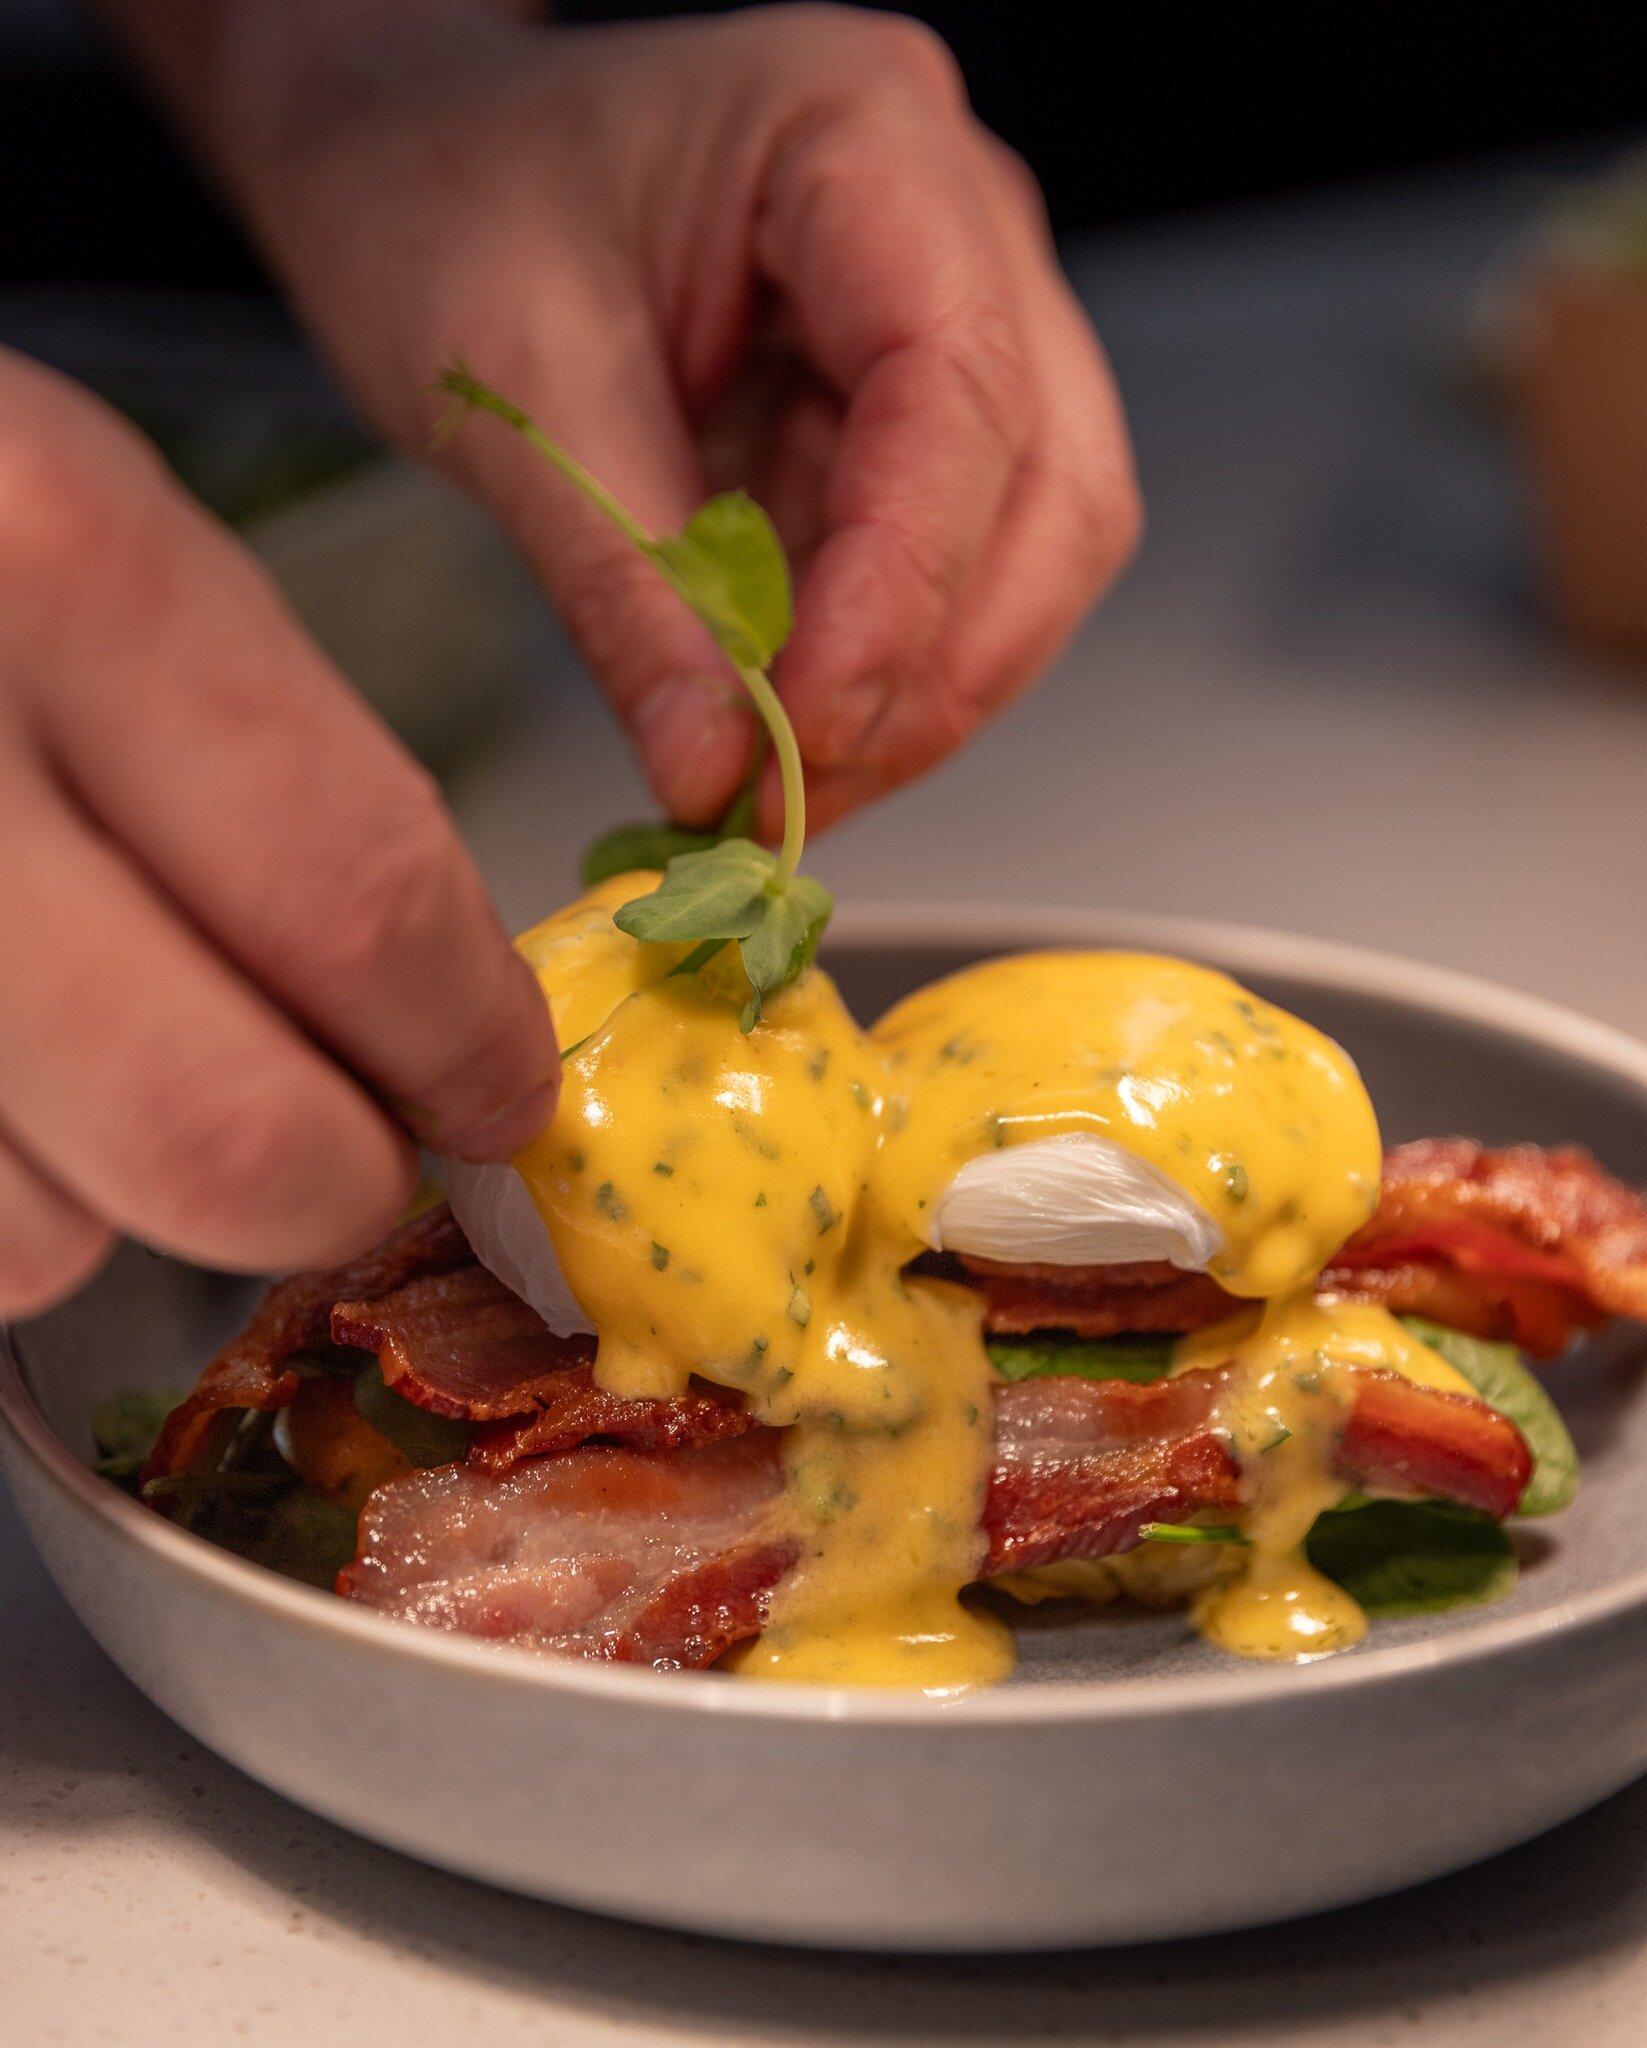 The BEST eggs bene dishes are just around the corner from you in Takapuna 😉 This one is our Streaky Bacon 🥓 and we also have Portobello Mushroom (vegetarian) 🍄 or Hot Smoked Salmon options 🐟

Free-range poached eggs, served on potato rosti with s